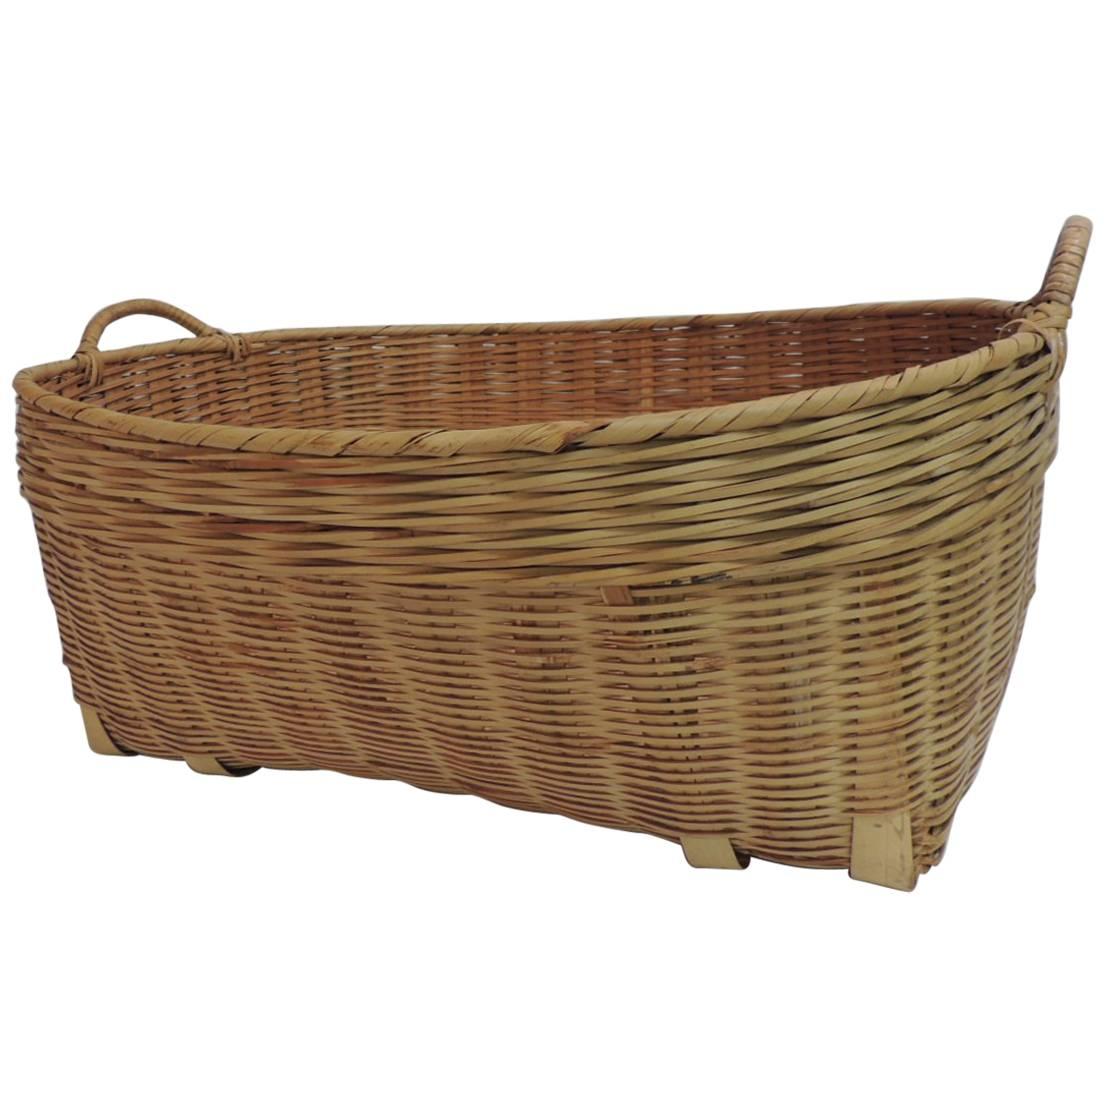 American Country Oval Large Wicker Woven Basket